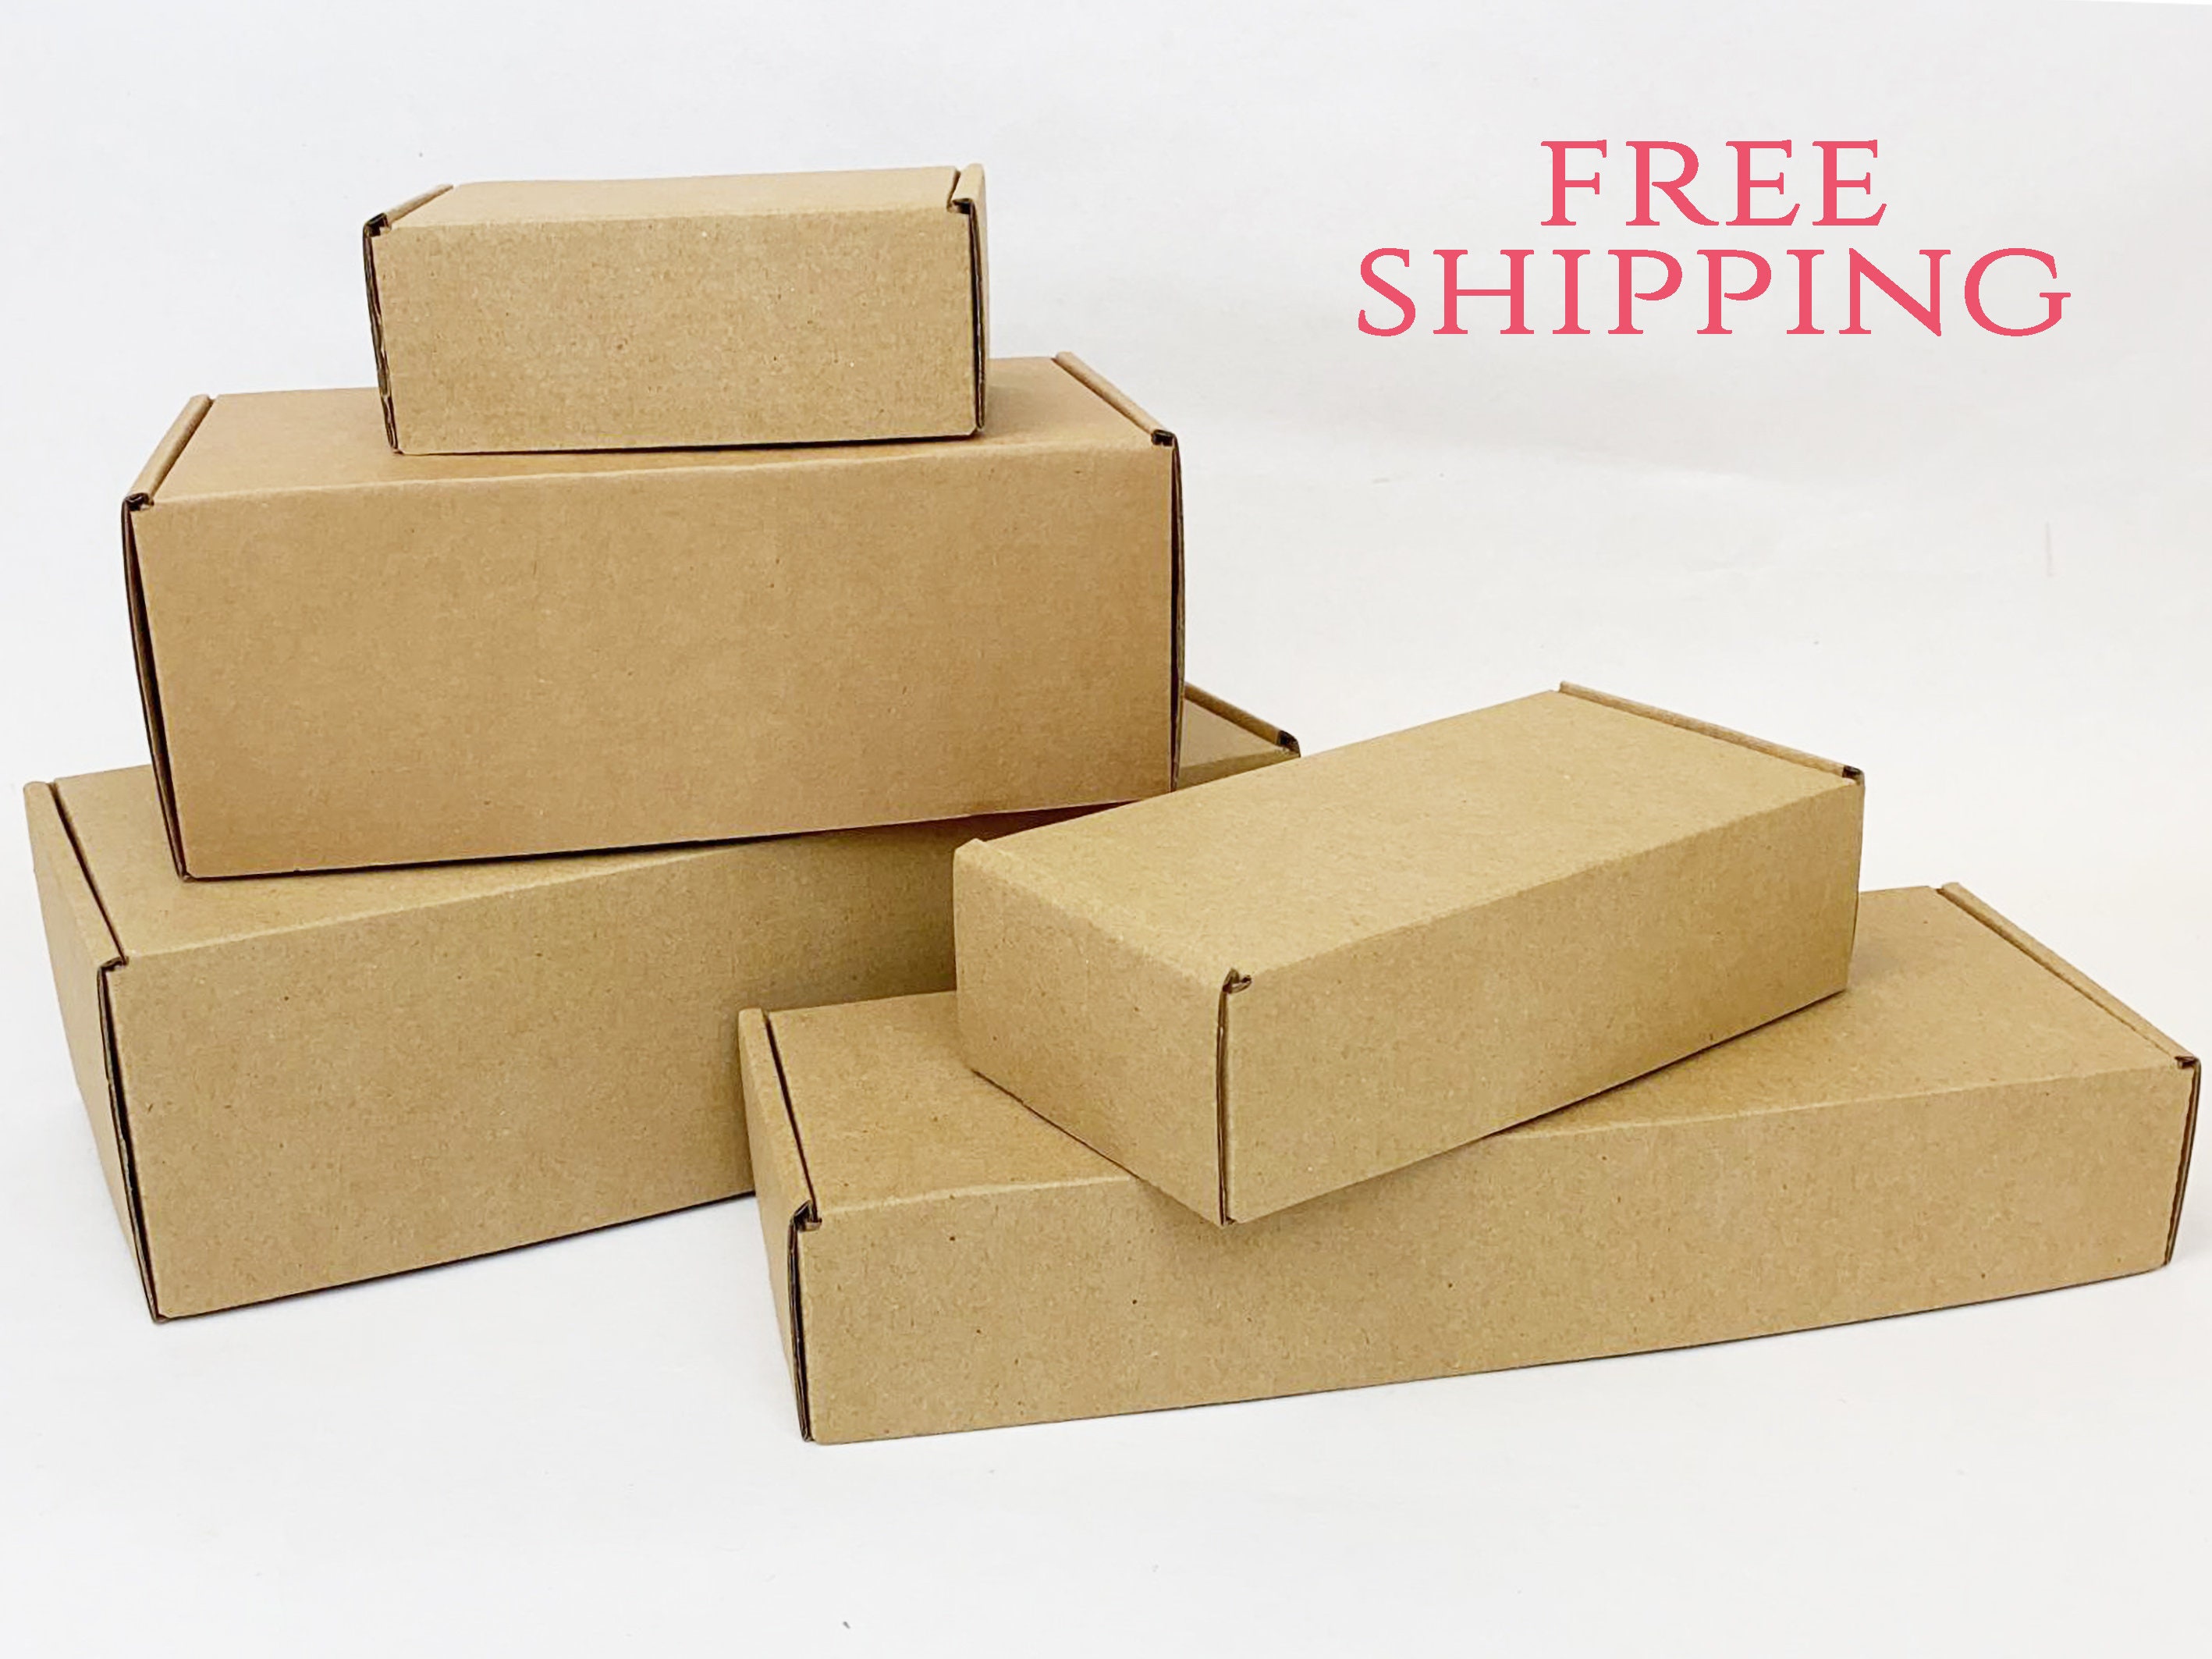 Cardboard Delivery Boxes l Flower Delivery Box l Vase Boxes Cardboard for delivery l Florist Delivery Boxes 10 8x 8x 4 l Sell in Bundle 